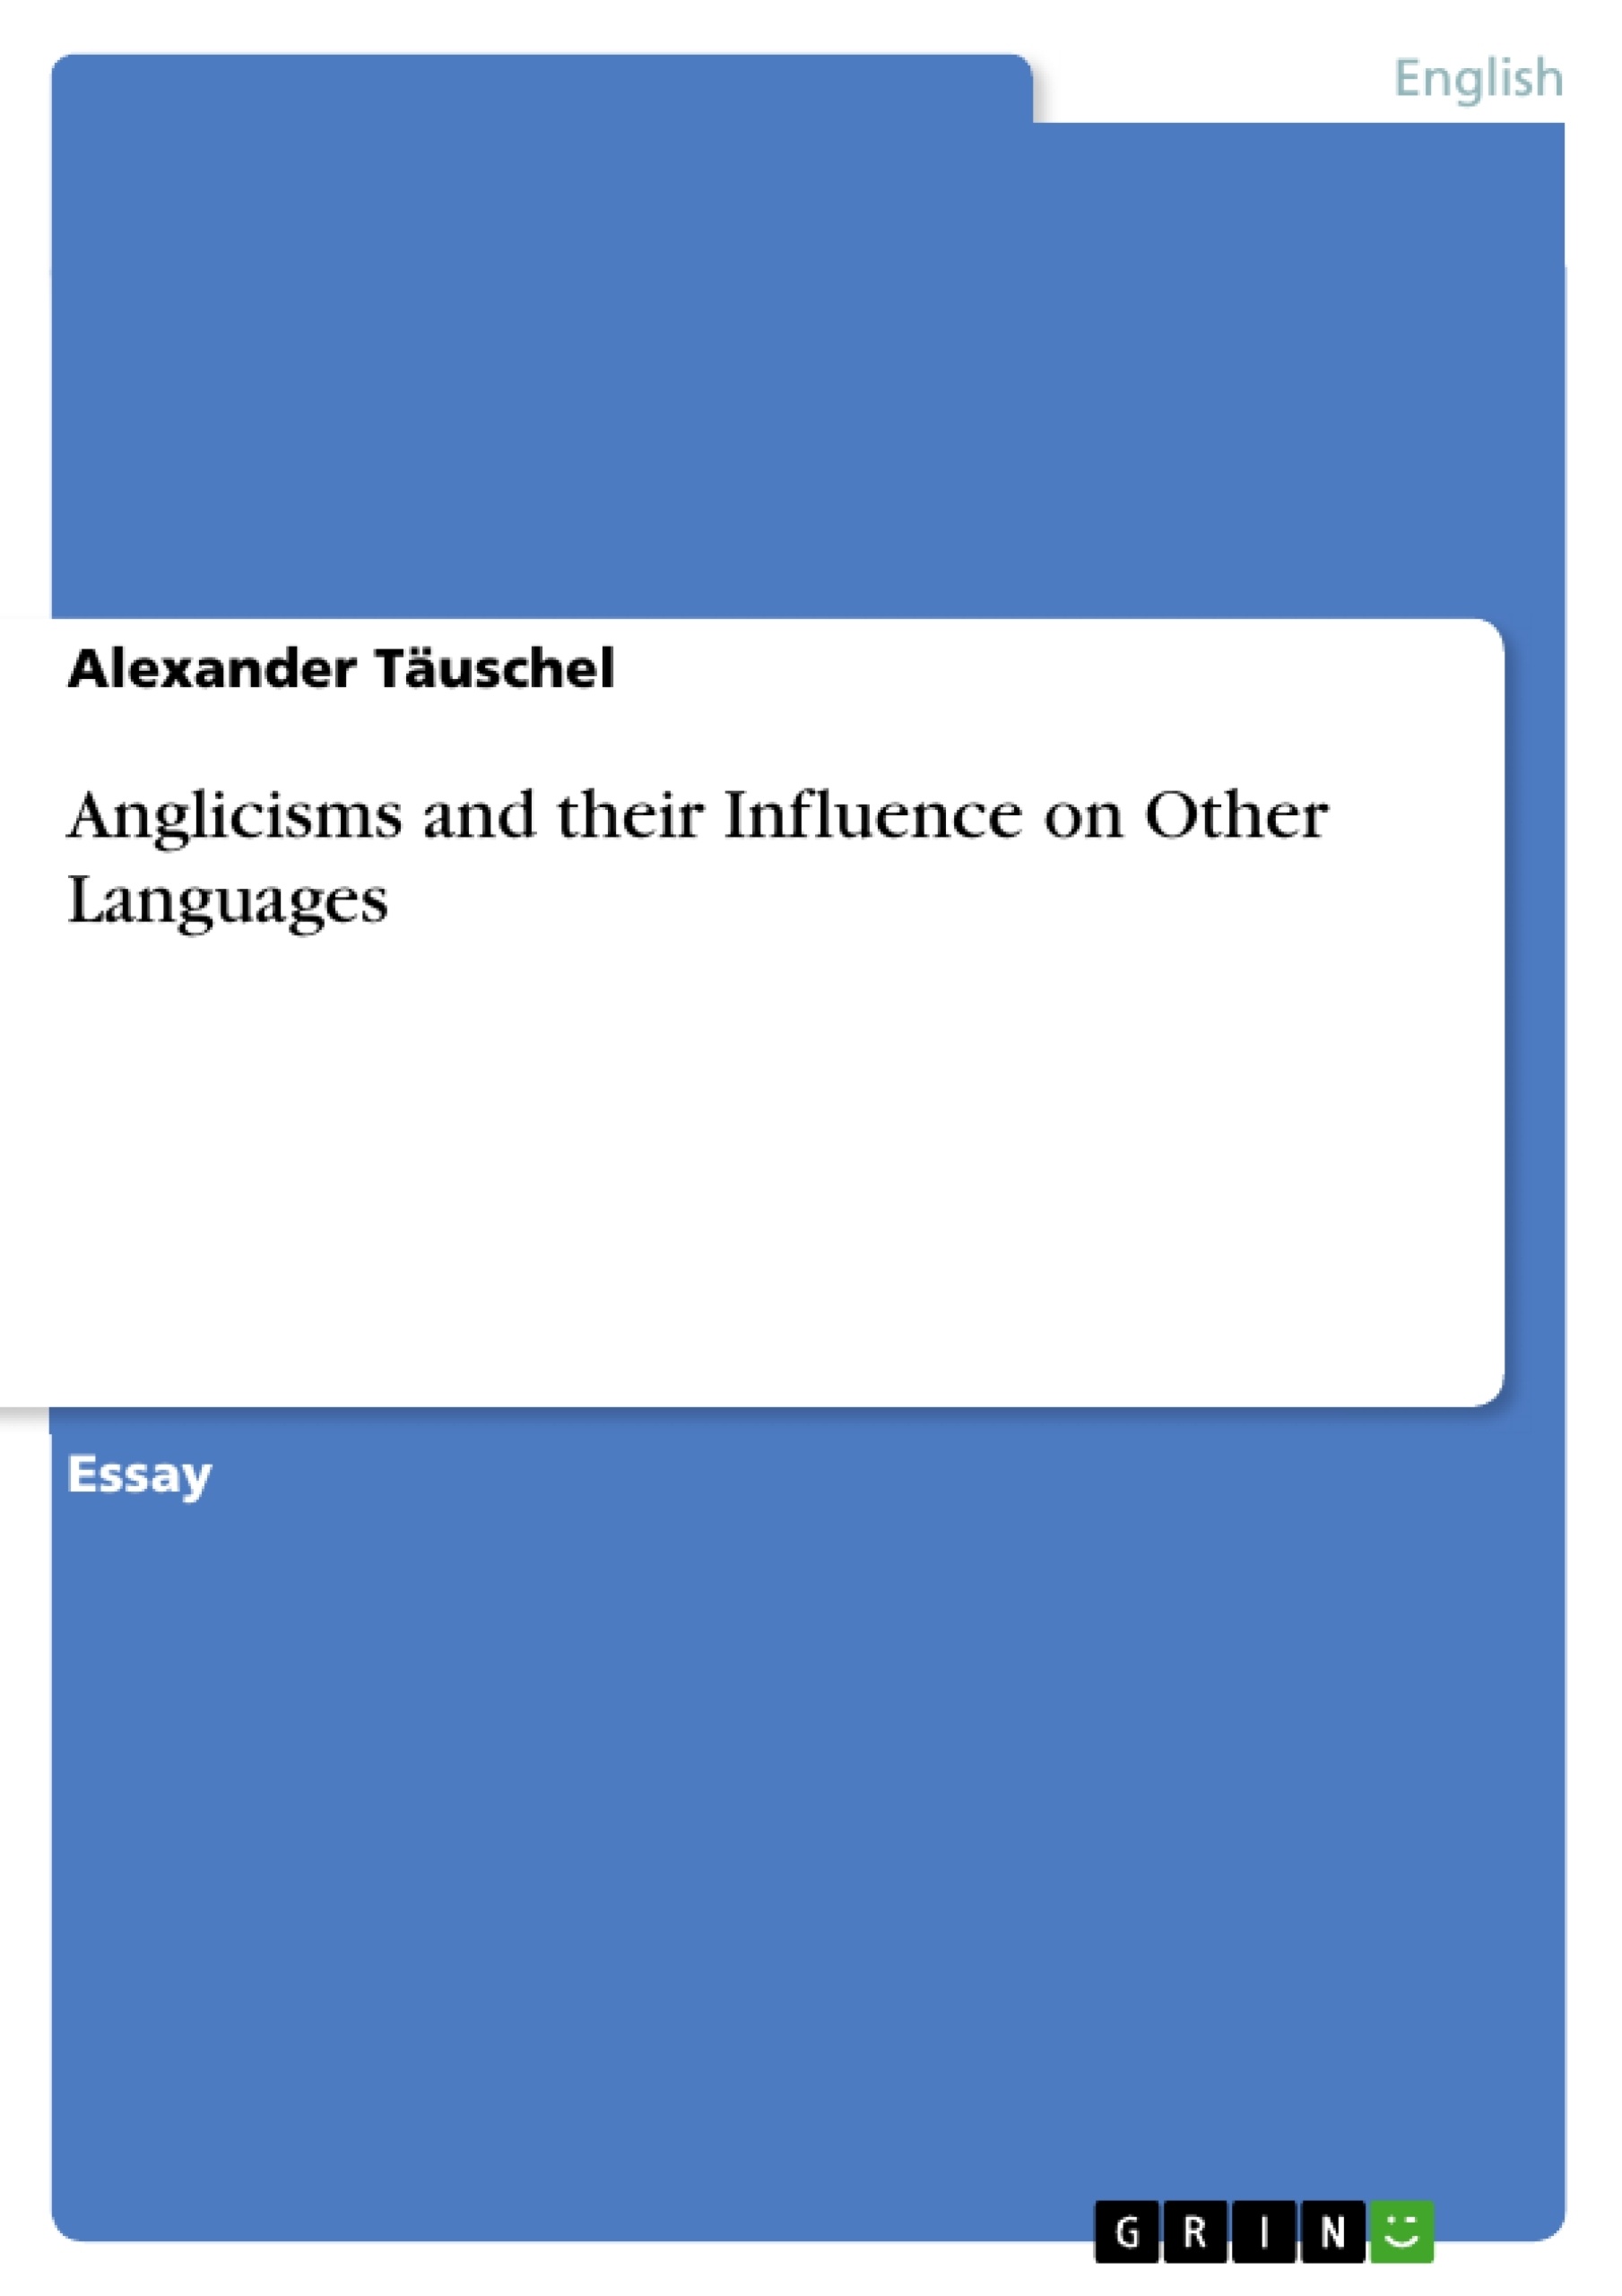 Titre: Anglicisms and their Influence on Other Languages